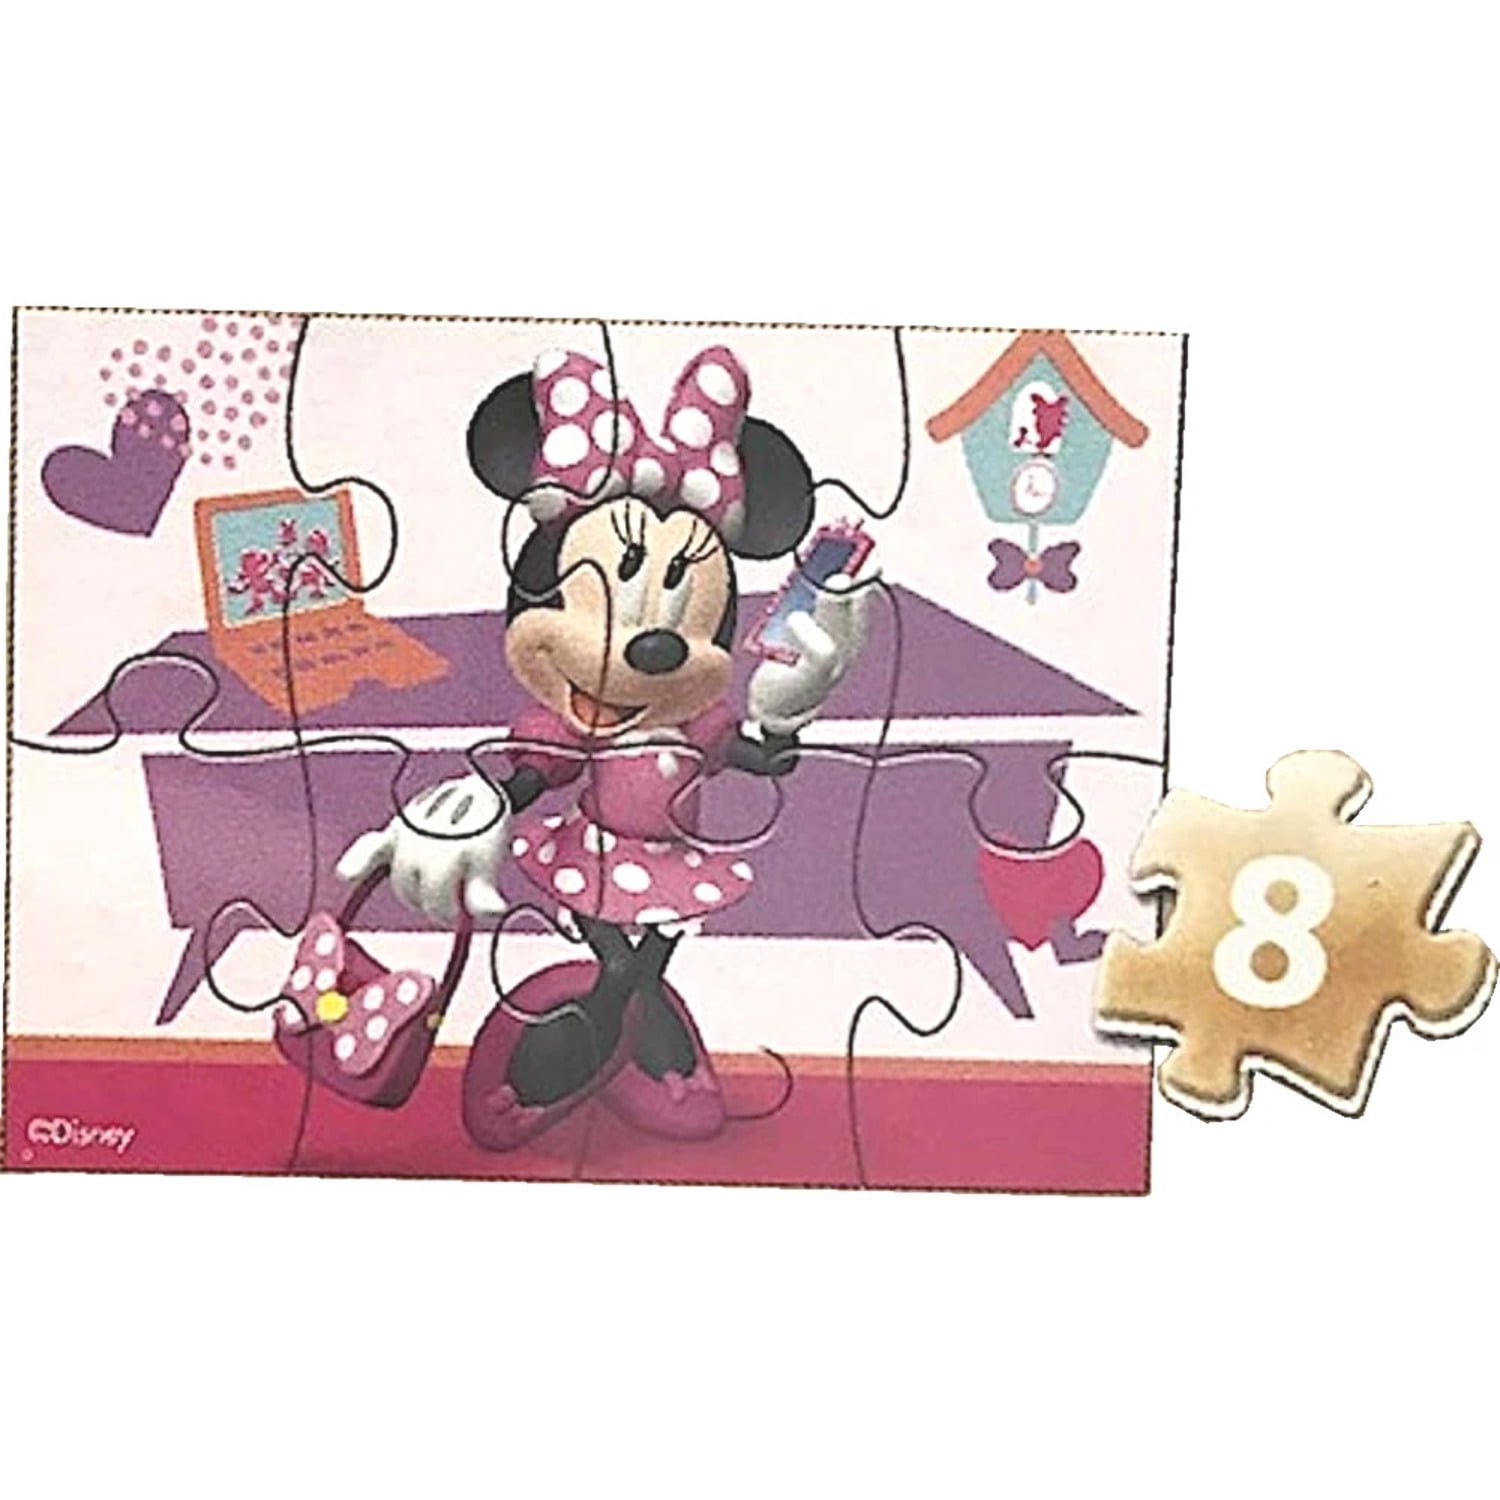 DISNEY MINNIE MOUSE BOW-TIQUE SET OF 4 WOODEN JIGSAWS DAISY DUCK STORAGE BOX 